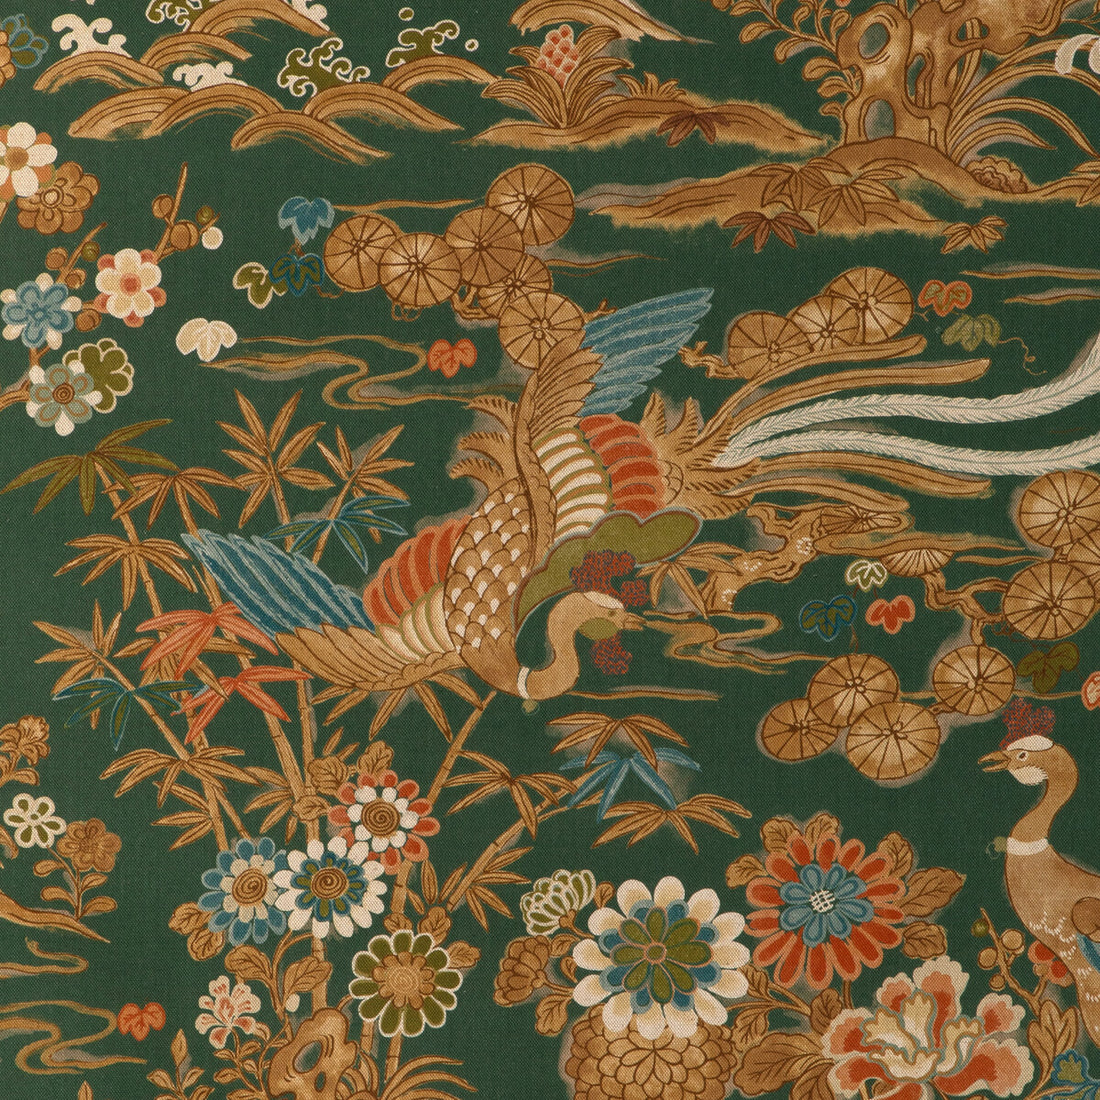 Sakura Print fabric in green color - pattern 2023139.3.0 - by Lee Jofa in the Garden Walk collection